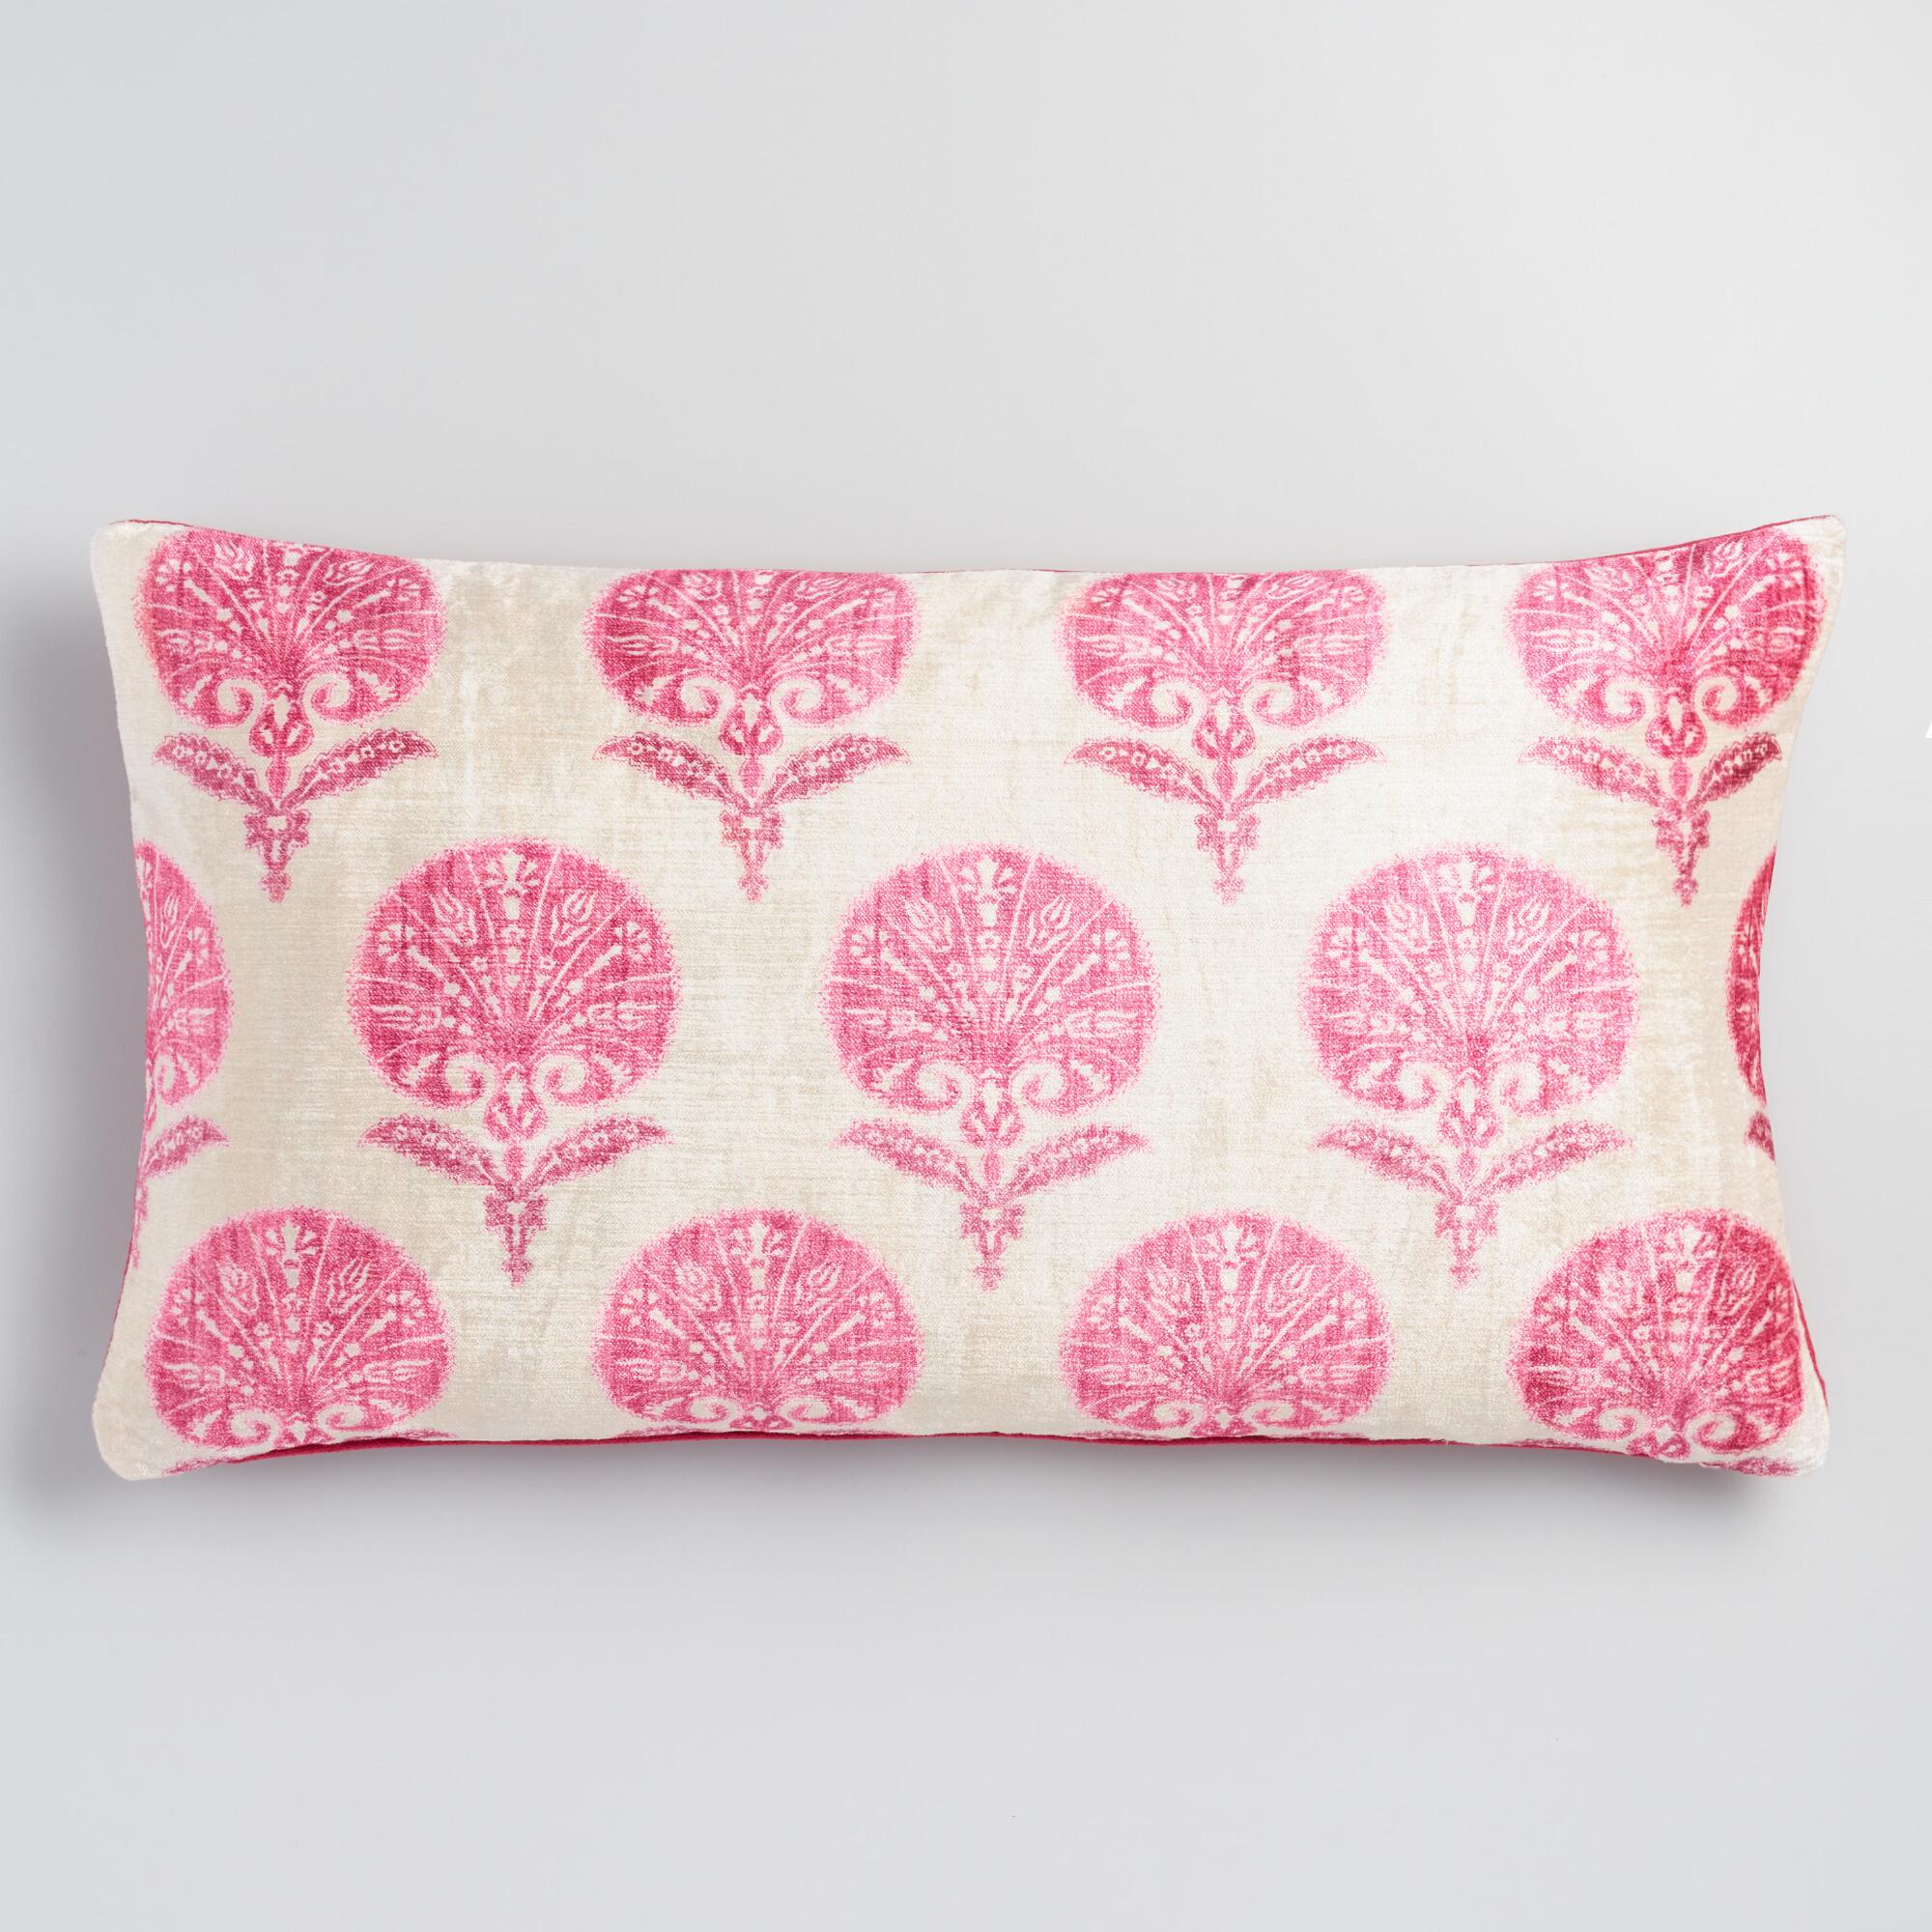 Floral Velvet Lumbar Pillow-14x24-with Insert... by World Market/Cost ...